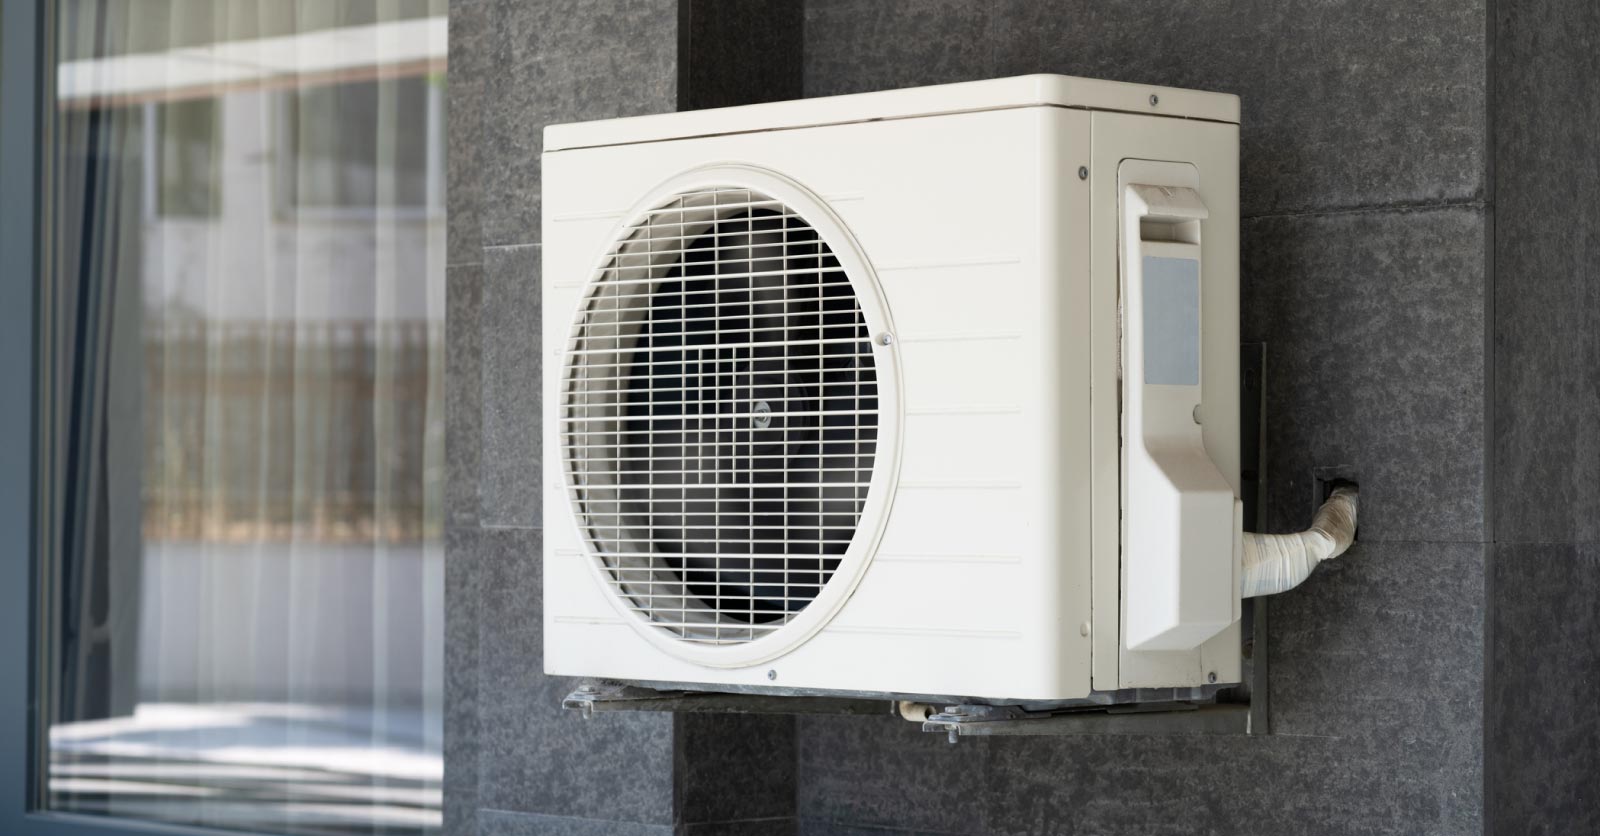 Going Ductless To Modernize an Aging Building